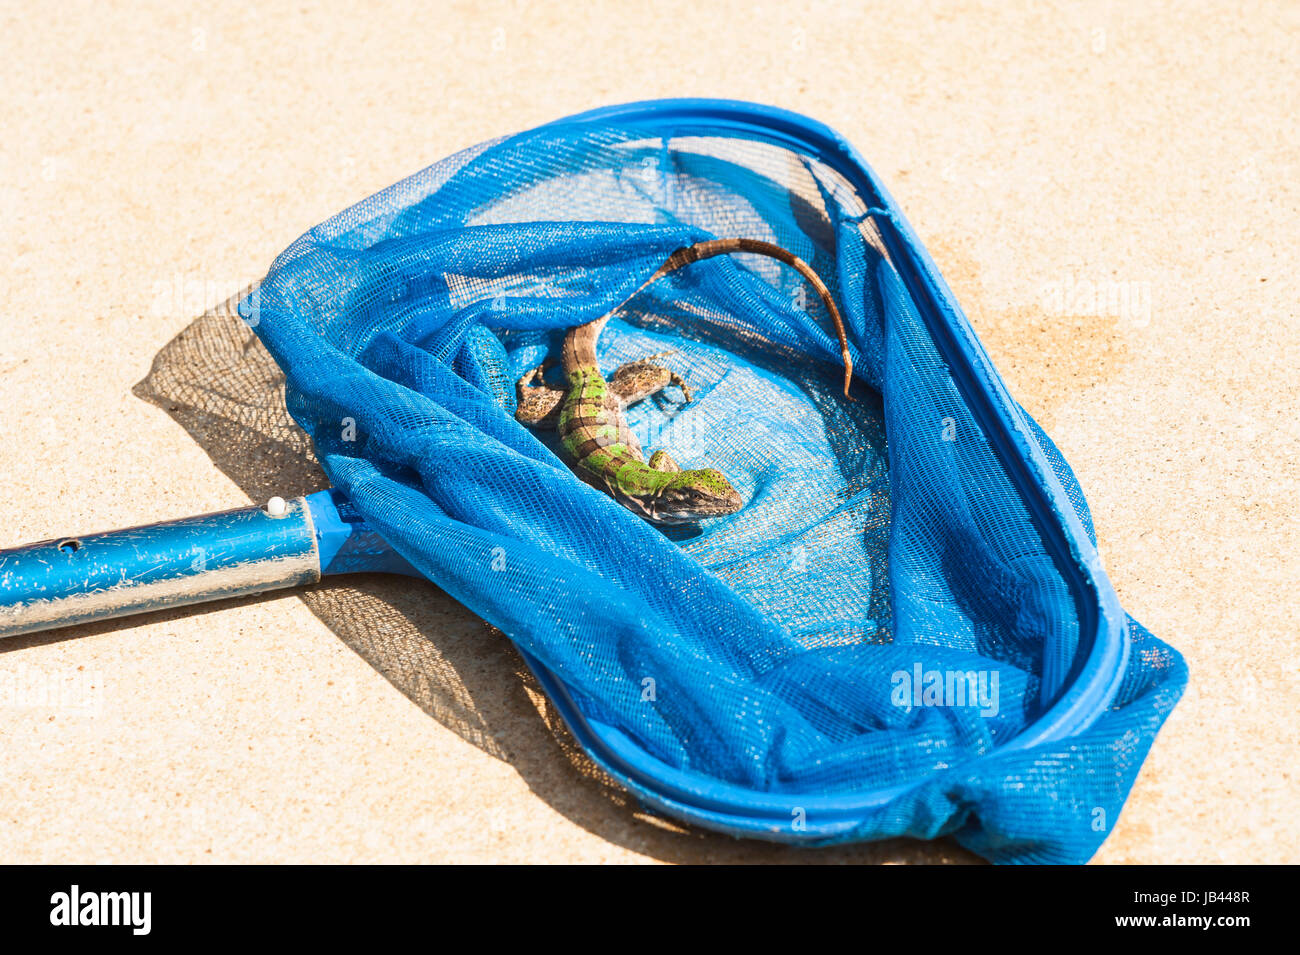 Baby iguana rests in a pool net on the pool deck after being rescued. Stock Photo